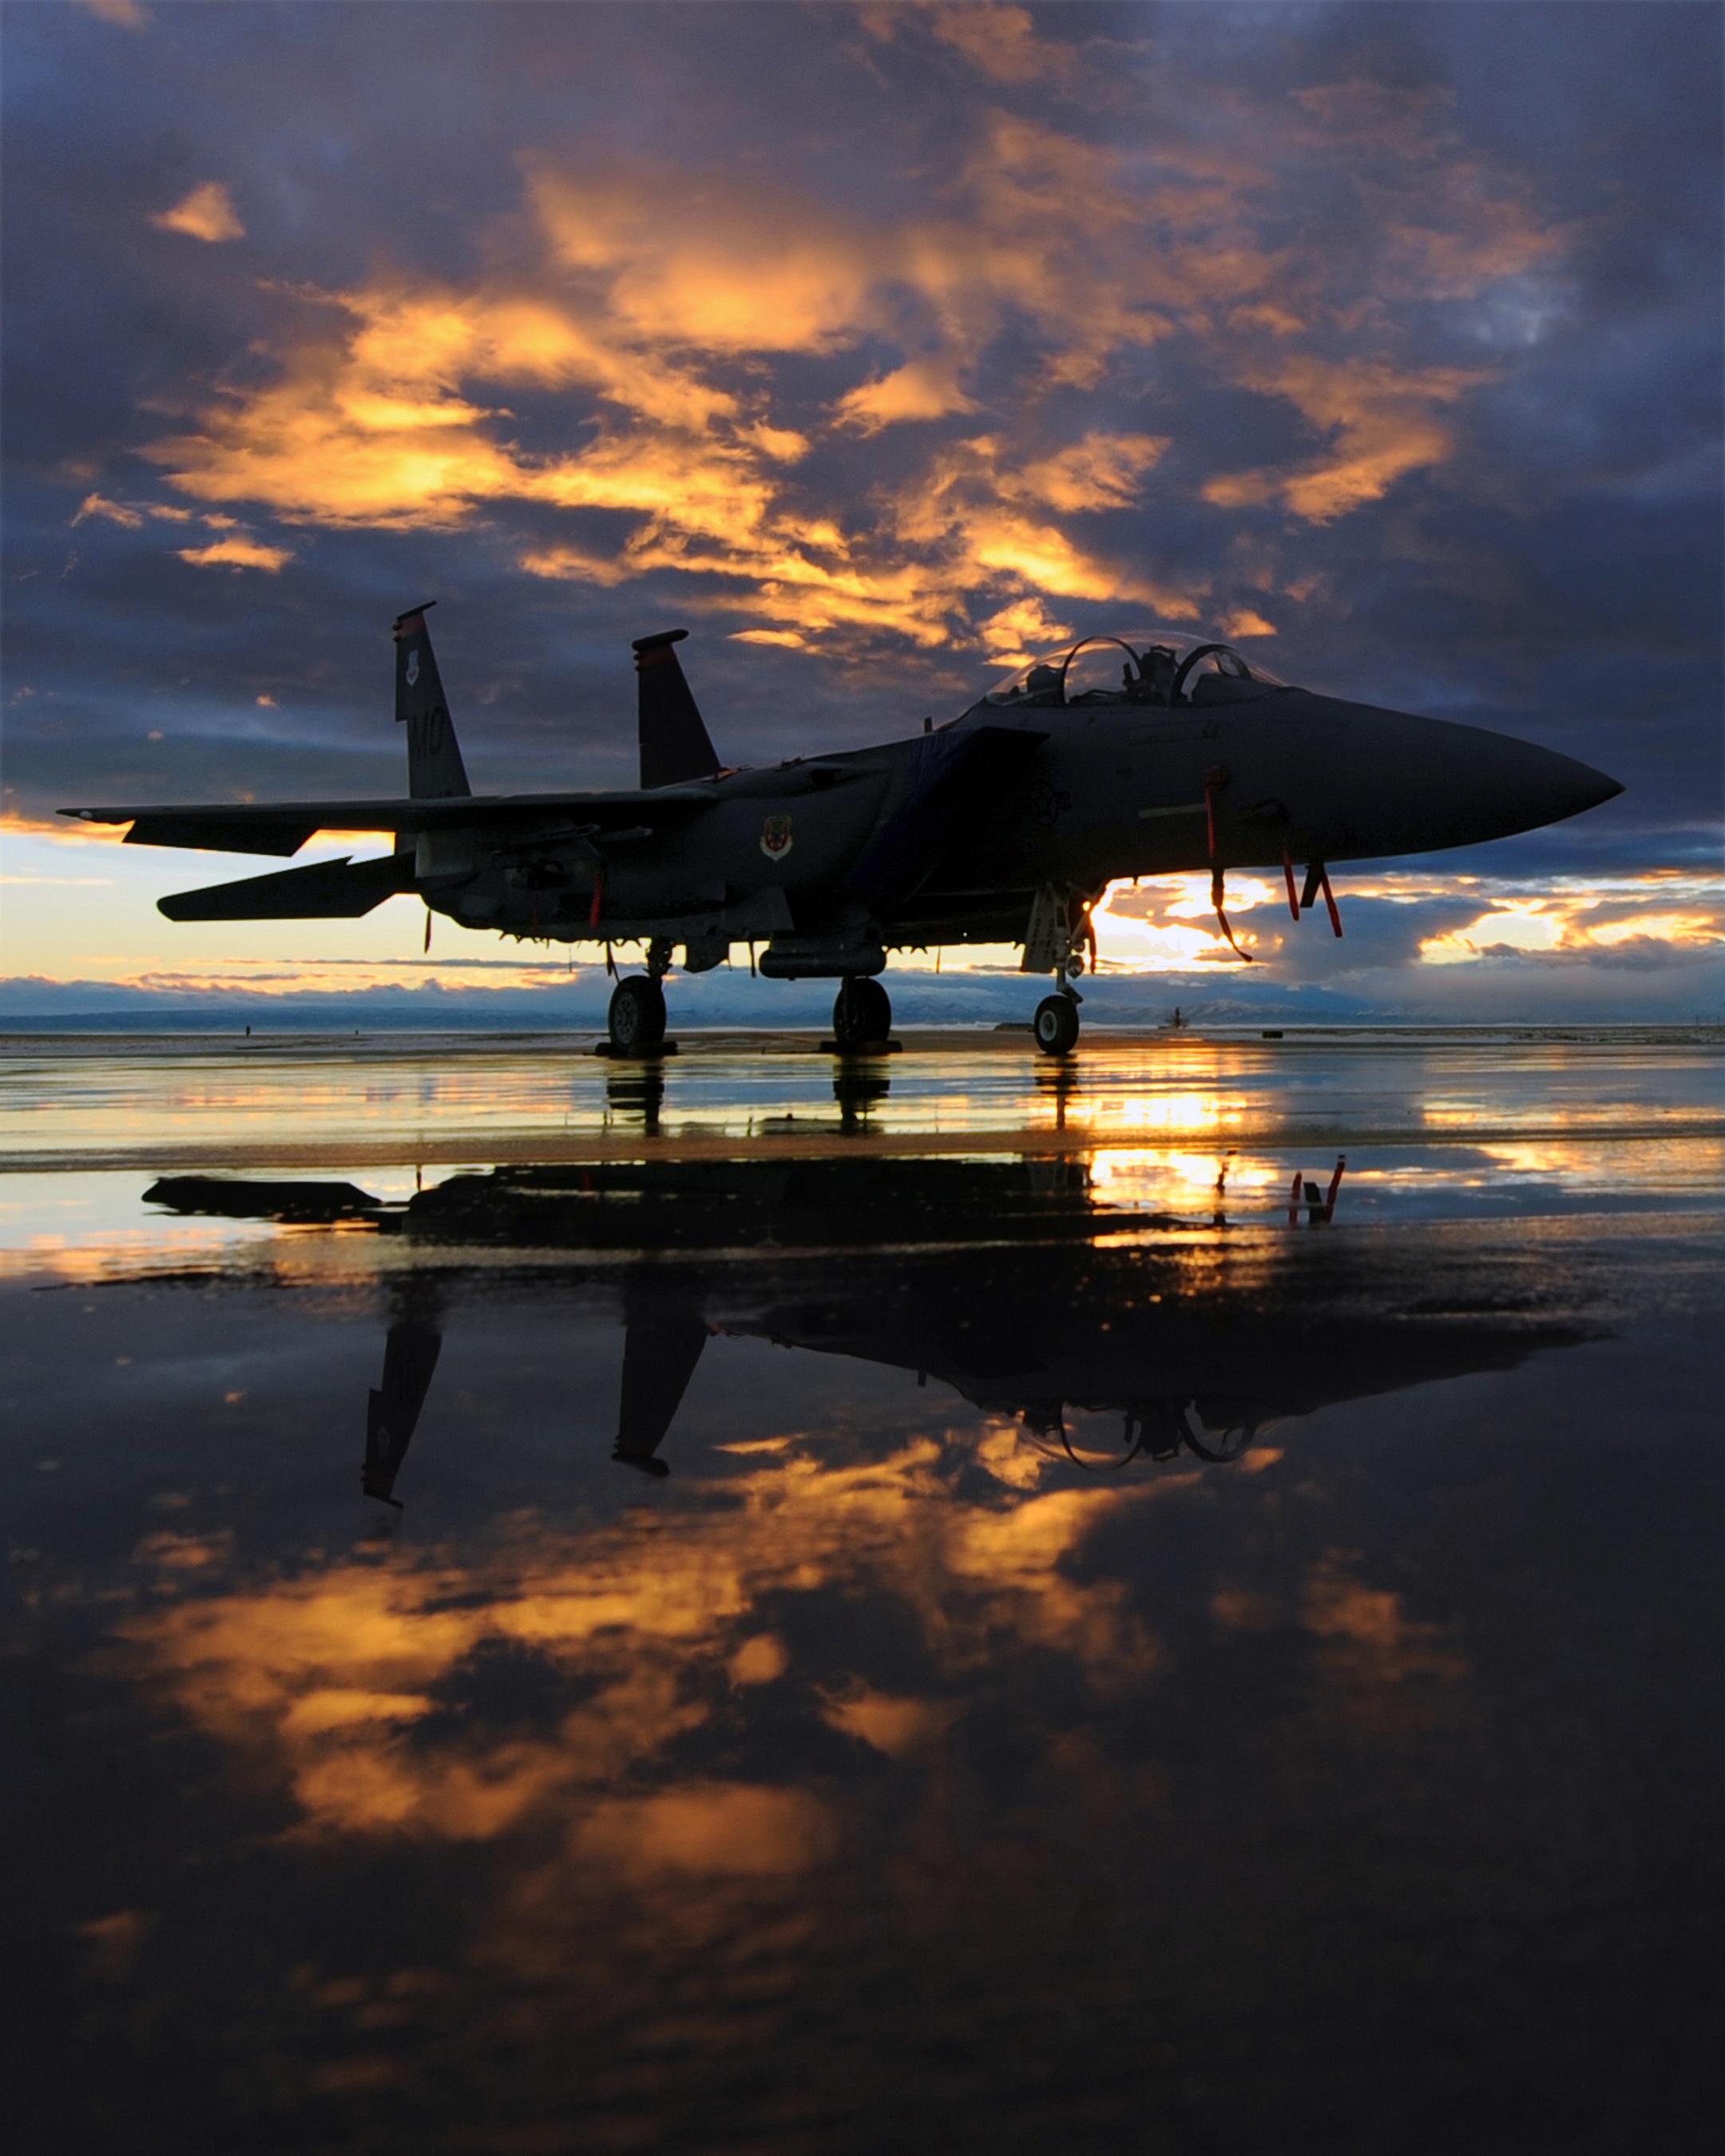 This photograph was taken by Senior Airman Debbie Lockhart, U.S. Air Force, at Mountain Home Air Force Base, 6 December 2010. The aircraft is a McDonnell Douglas F-15E-50-MC Strike Eagle, 90-0247, assigned to the 391st Fighter Squadron ("Bold Tigers"), 366th Operations Group, Air Combat Command, Mountain Home Air Force Base, Idaho. (U.S. Air Force)